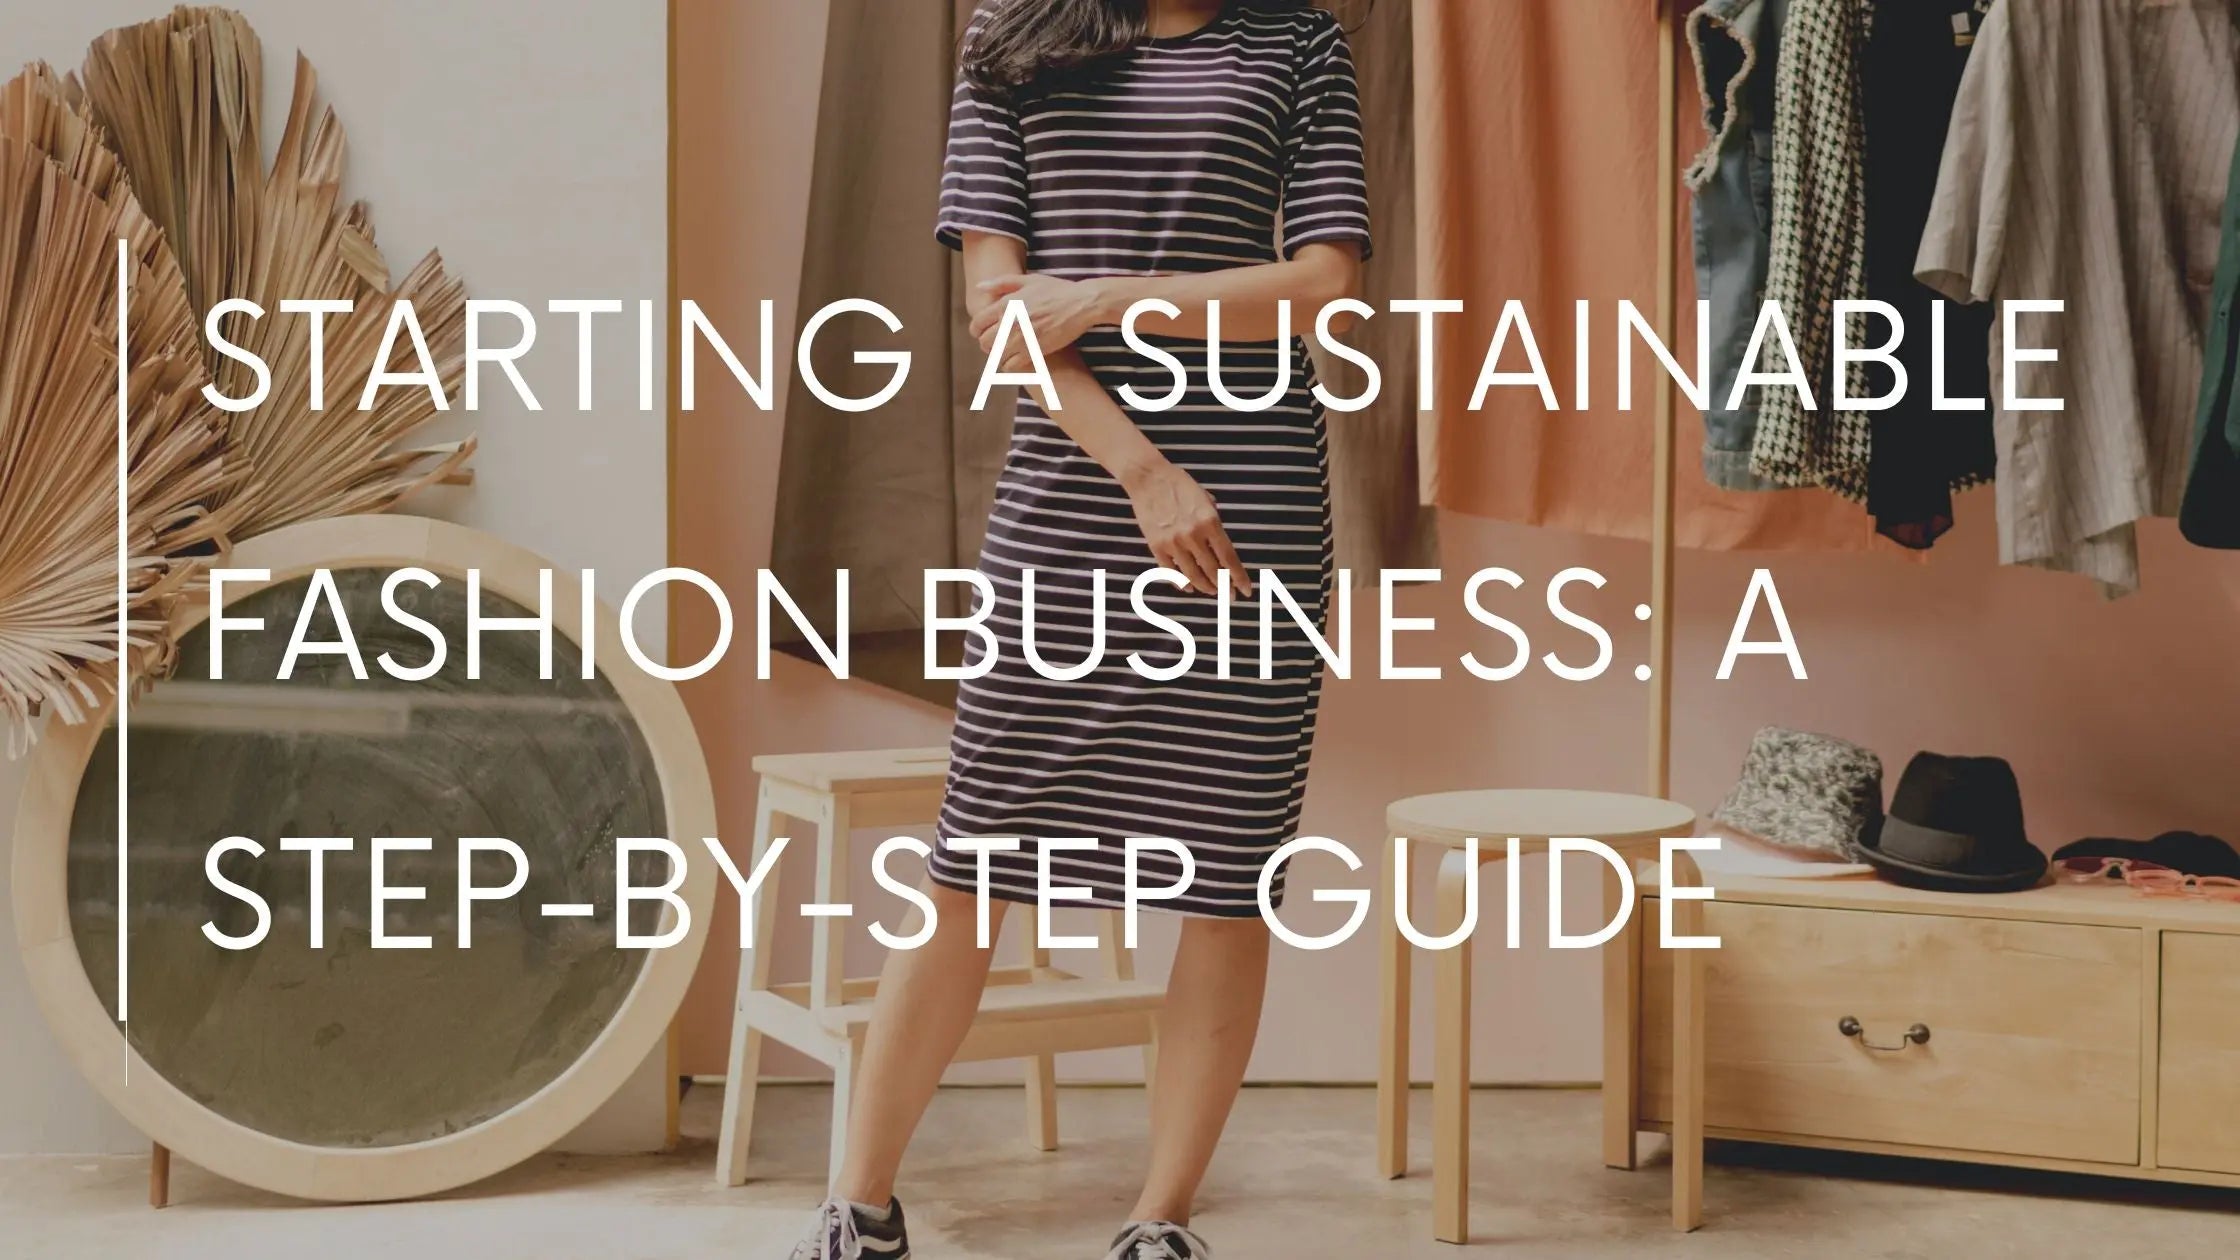 Starting-a-Sustainable-Fashion-Business-A-Step-by-Step-Guide Velvety